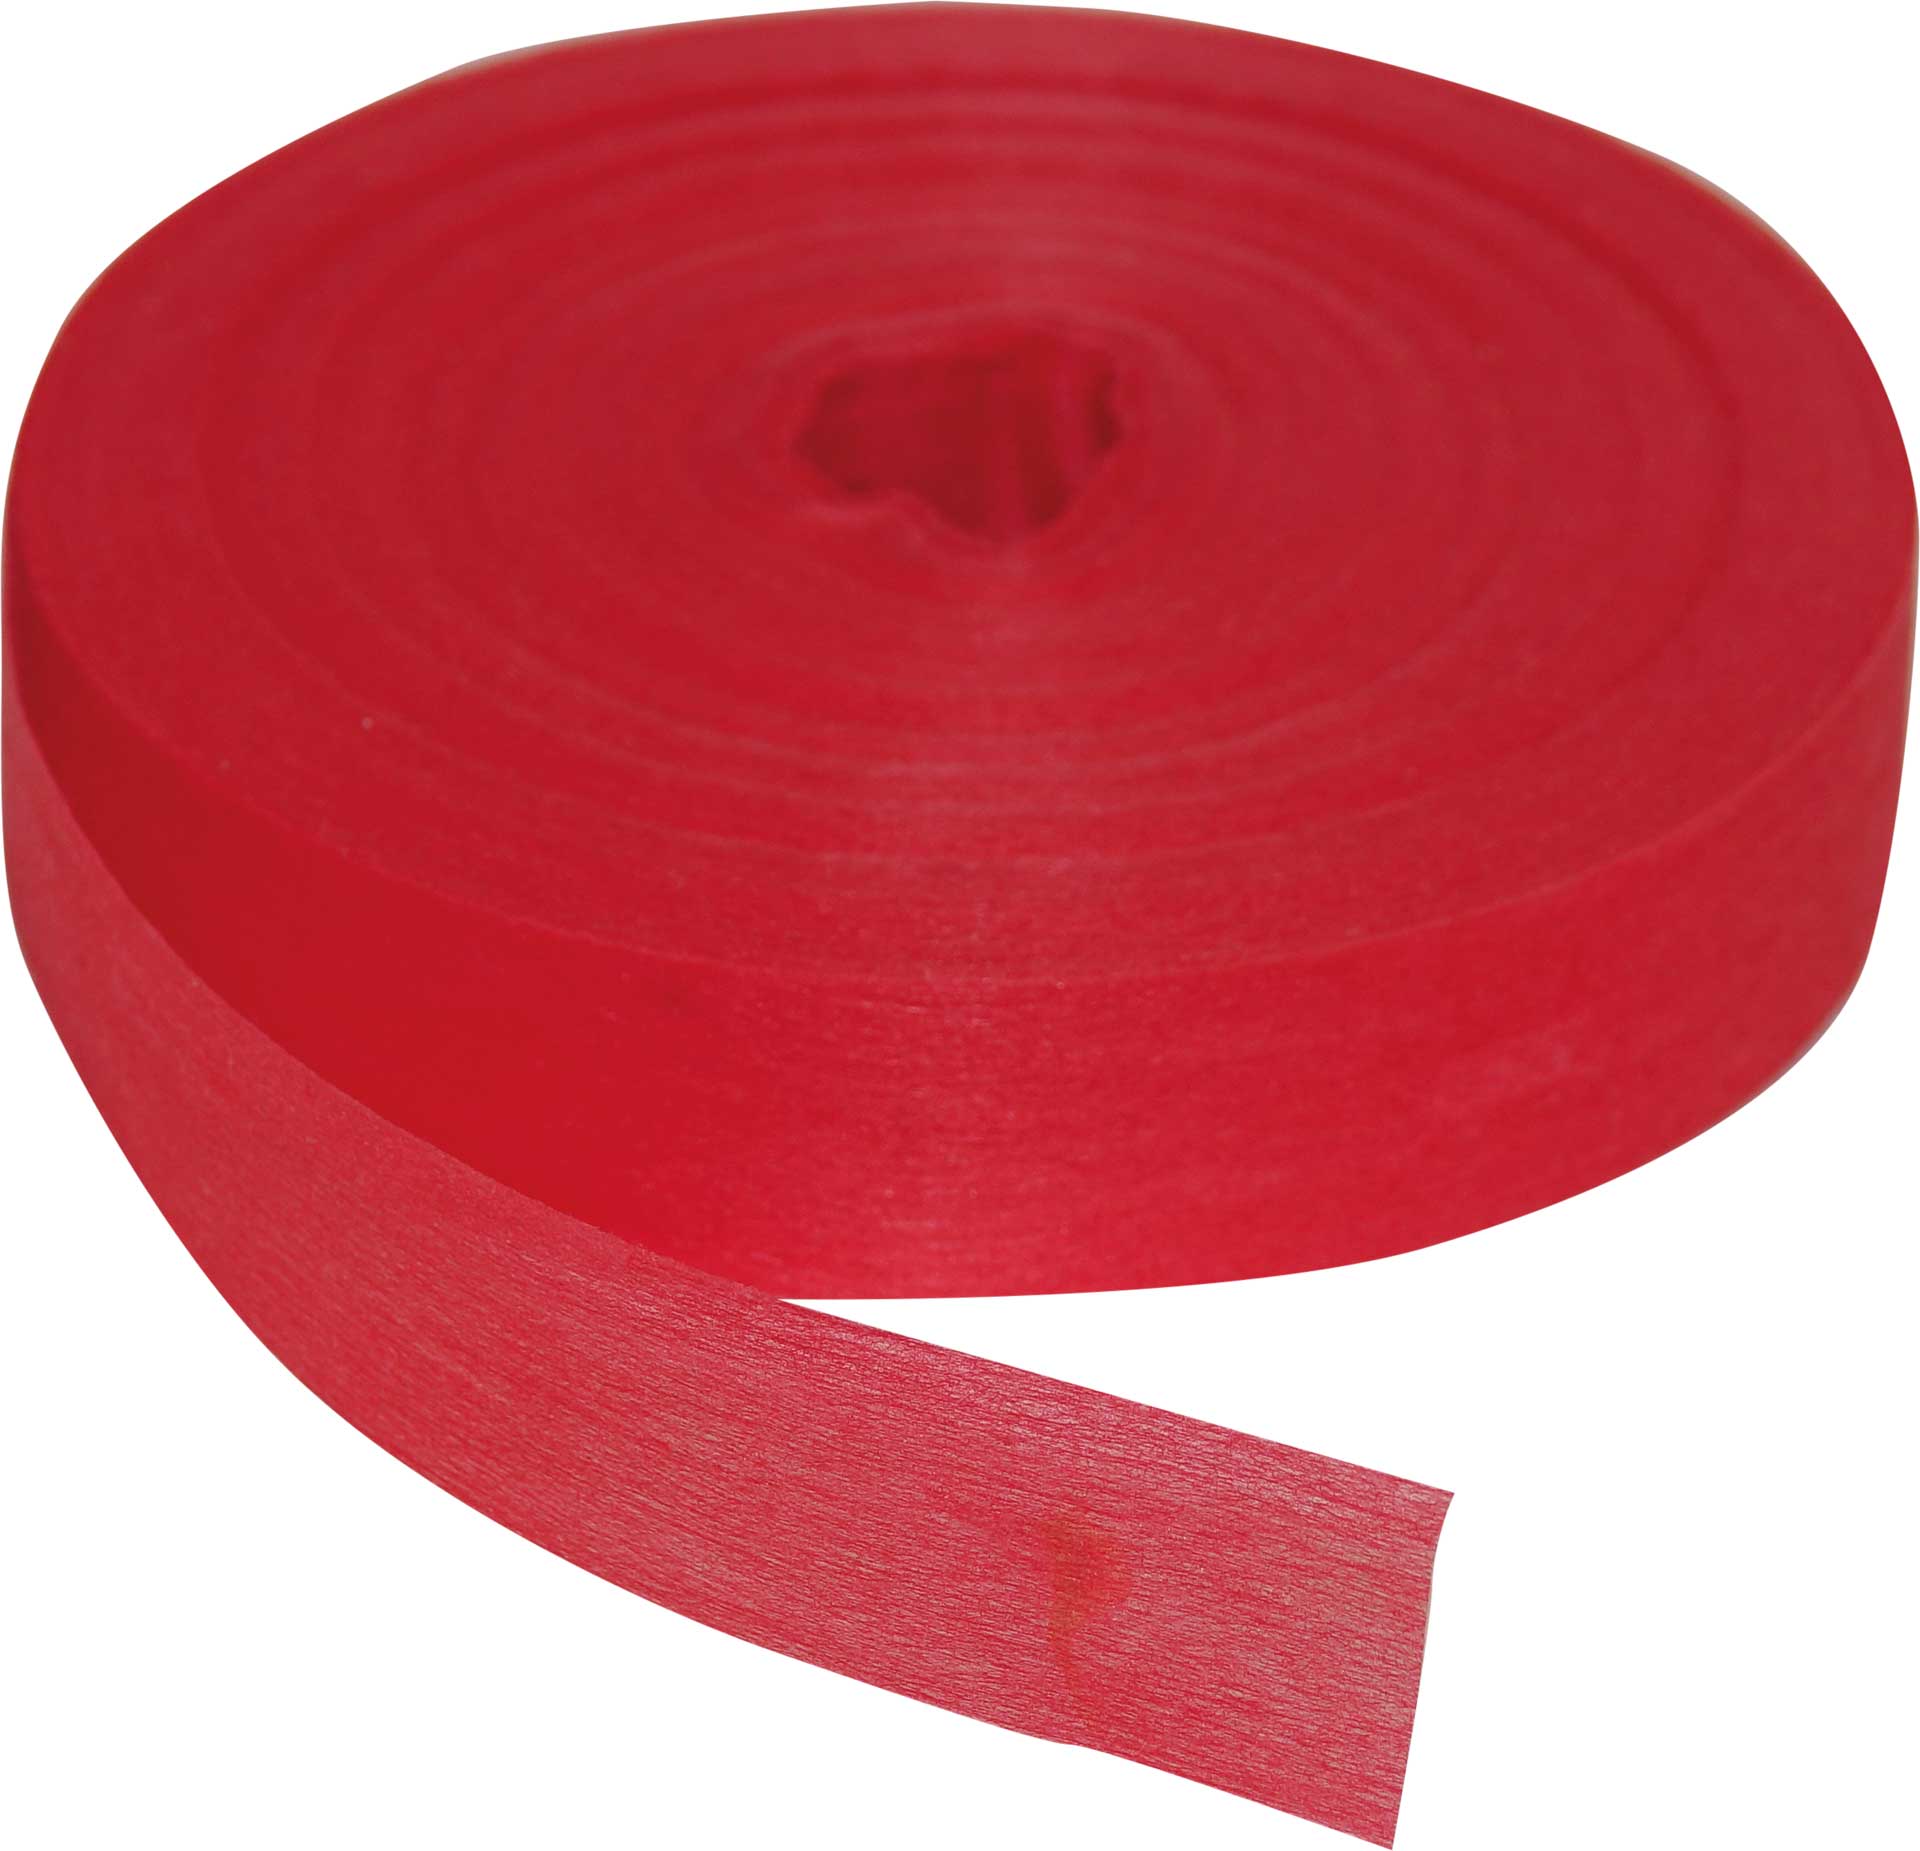 Robbe Modellsport Ribbons for Wingo 2 in the colors red approx. 75m